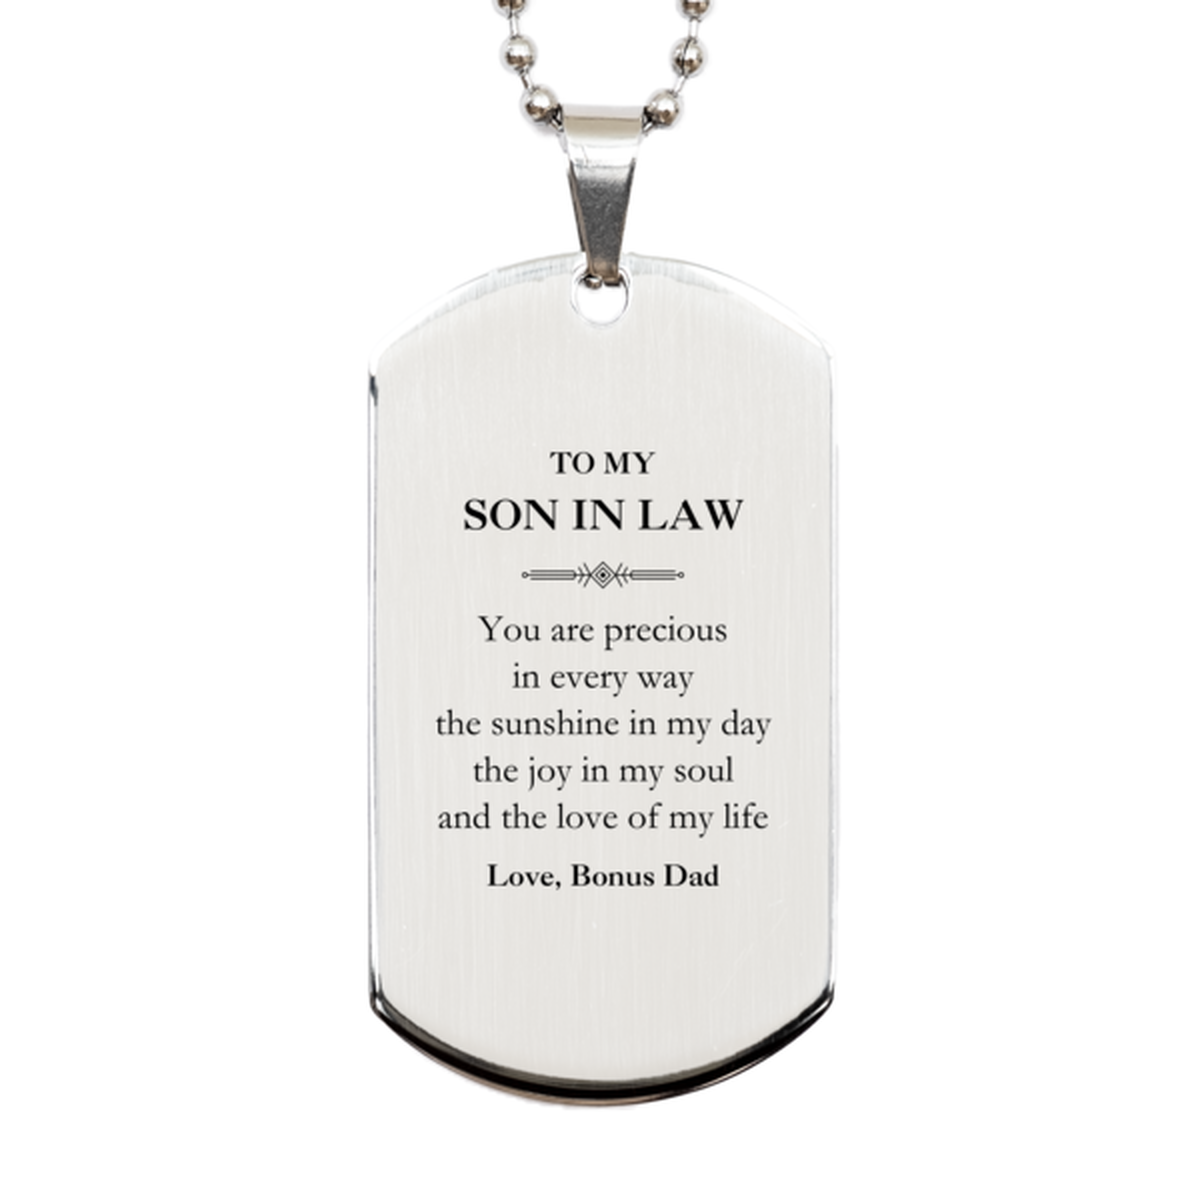 Graduation Gifts for Son In Law Silver Dog Tag Present from Bonus Dad, Christmas Son In Law Birthday Gifts Son In Law You are precious in every way the sunshine in my day. Love, Bonus Dad